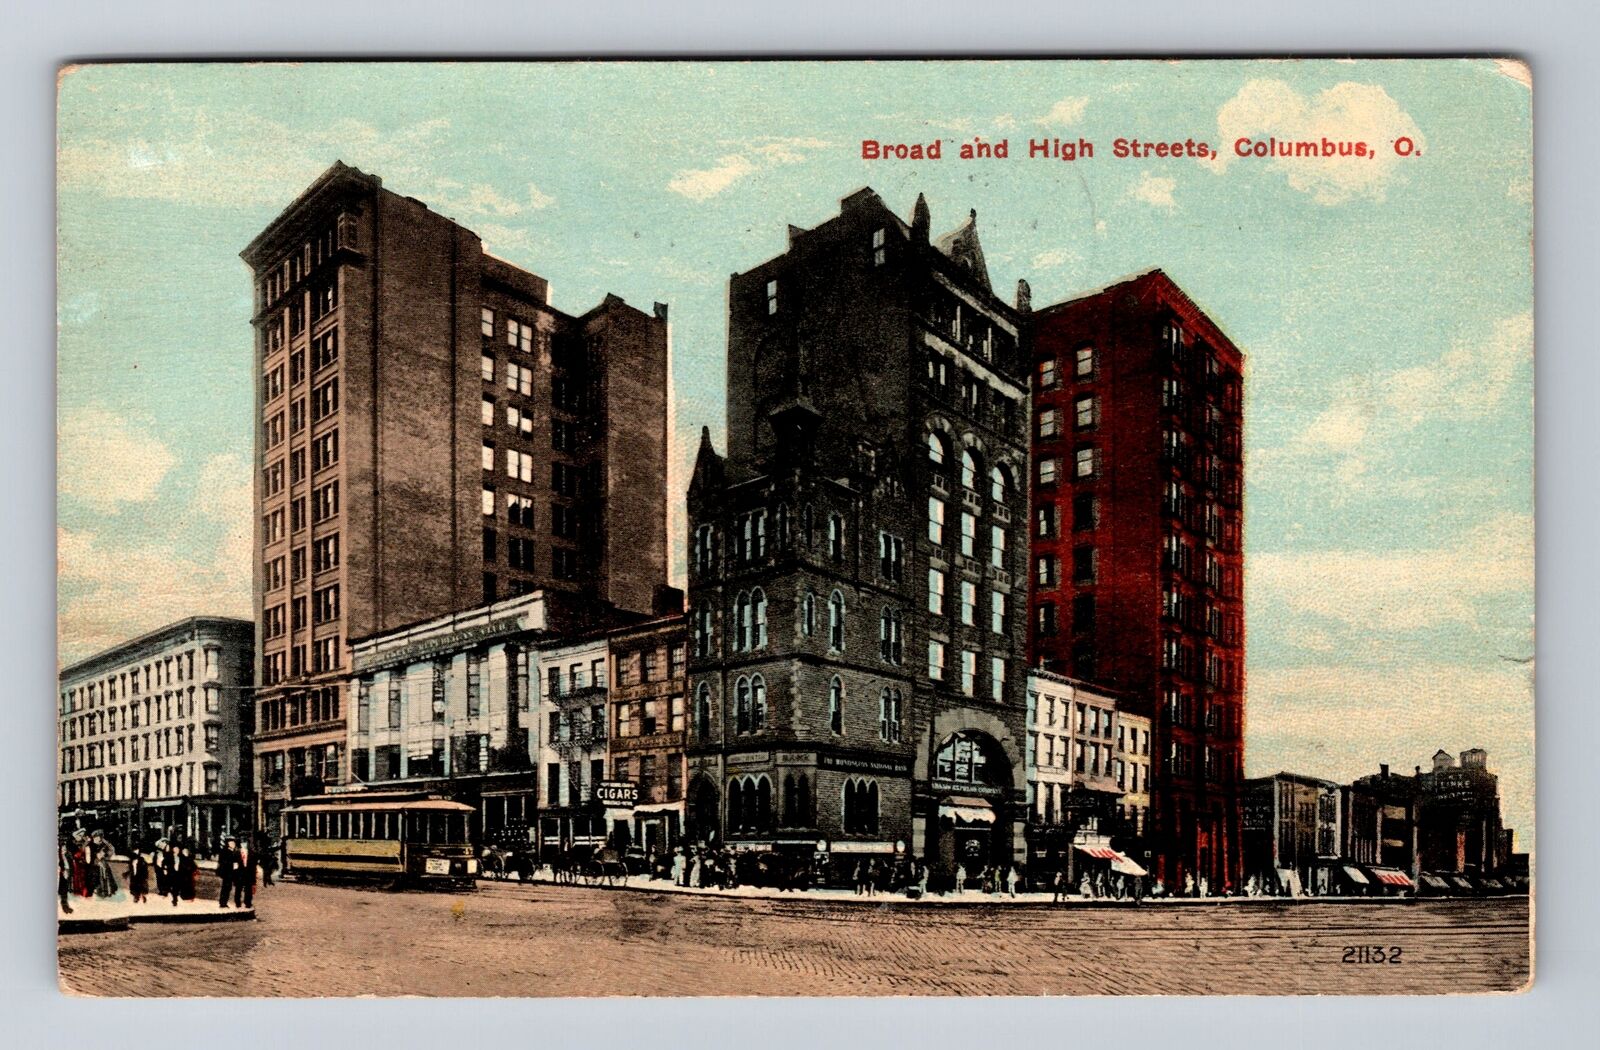 Columbus OH-Ohio, Broad And High Streets, Advertisment, Vintage c1913 Postcard